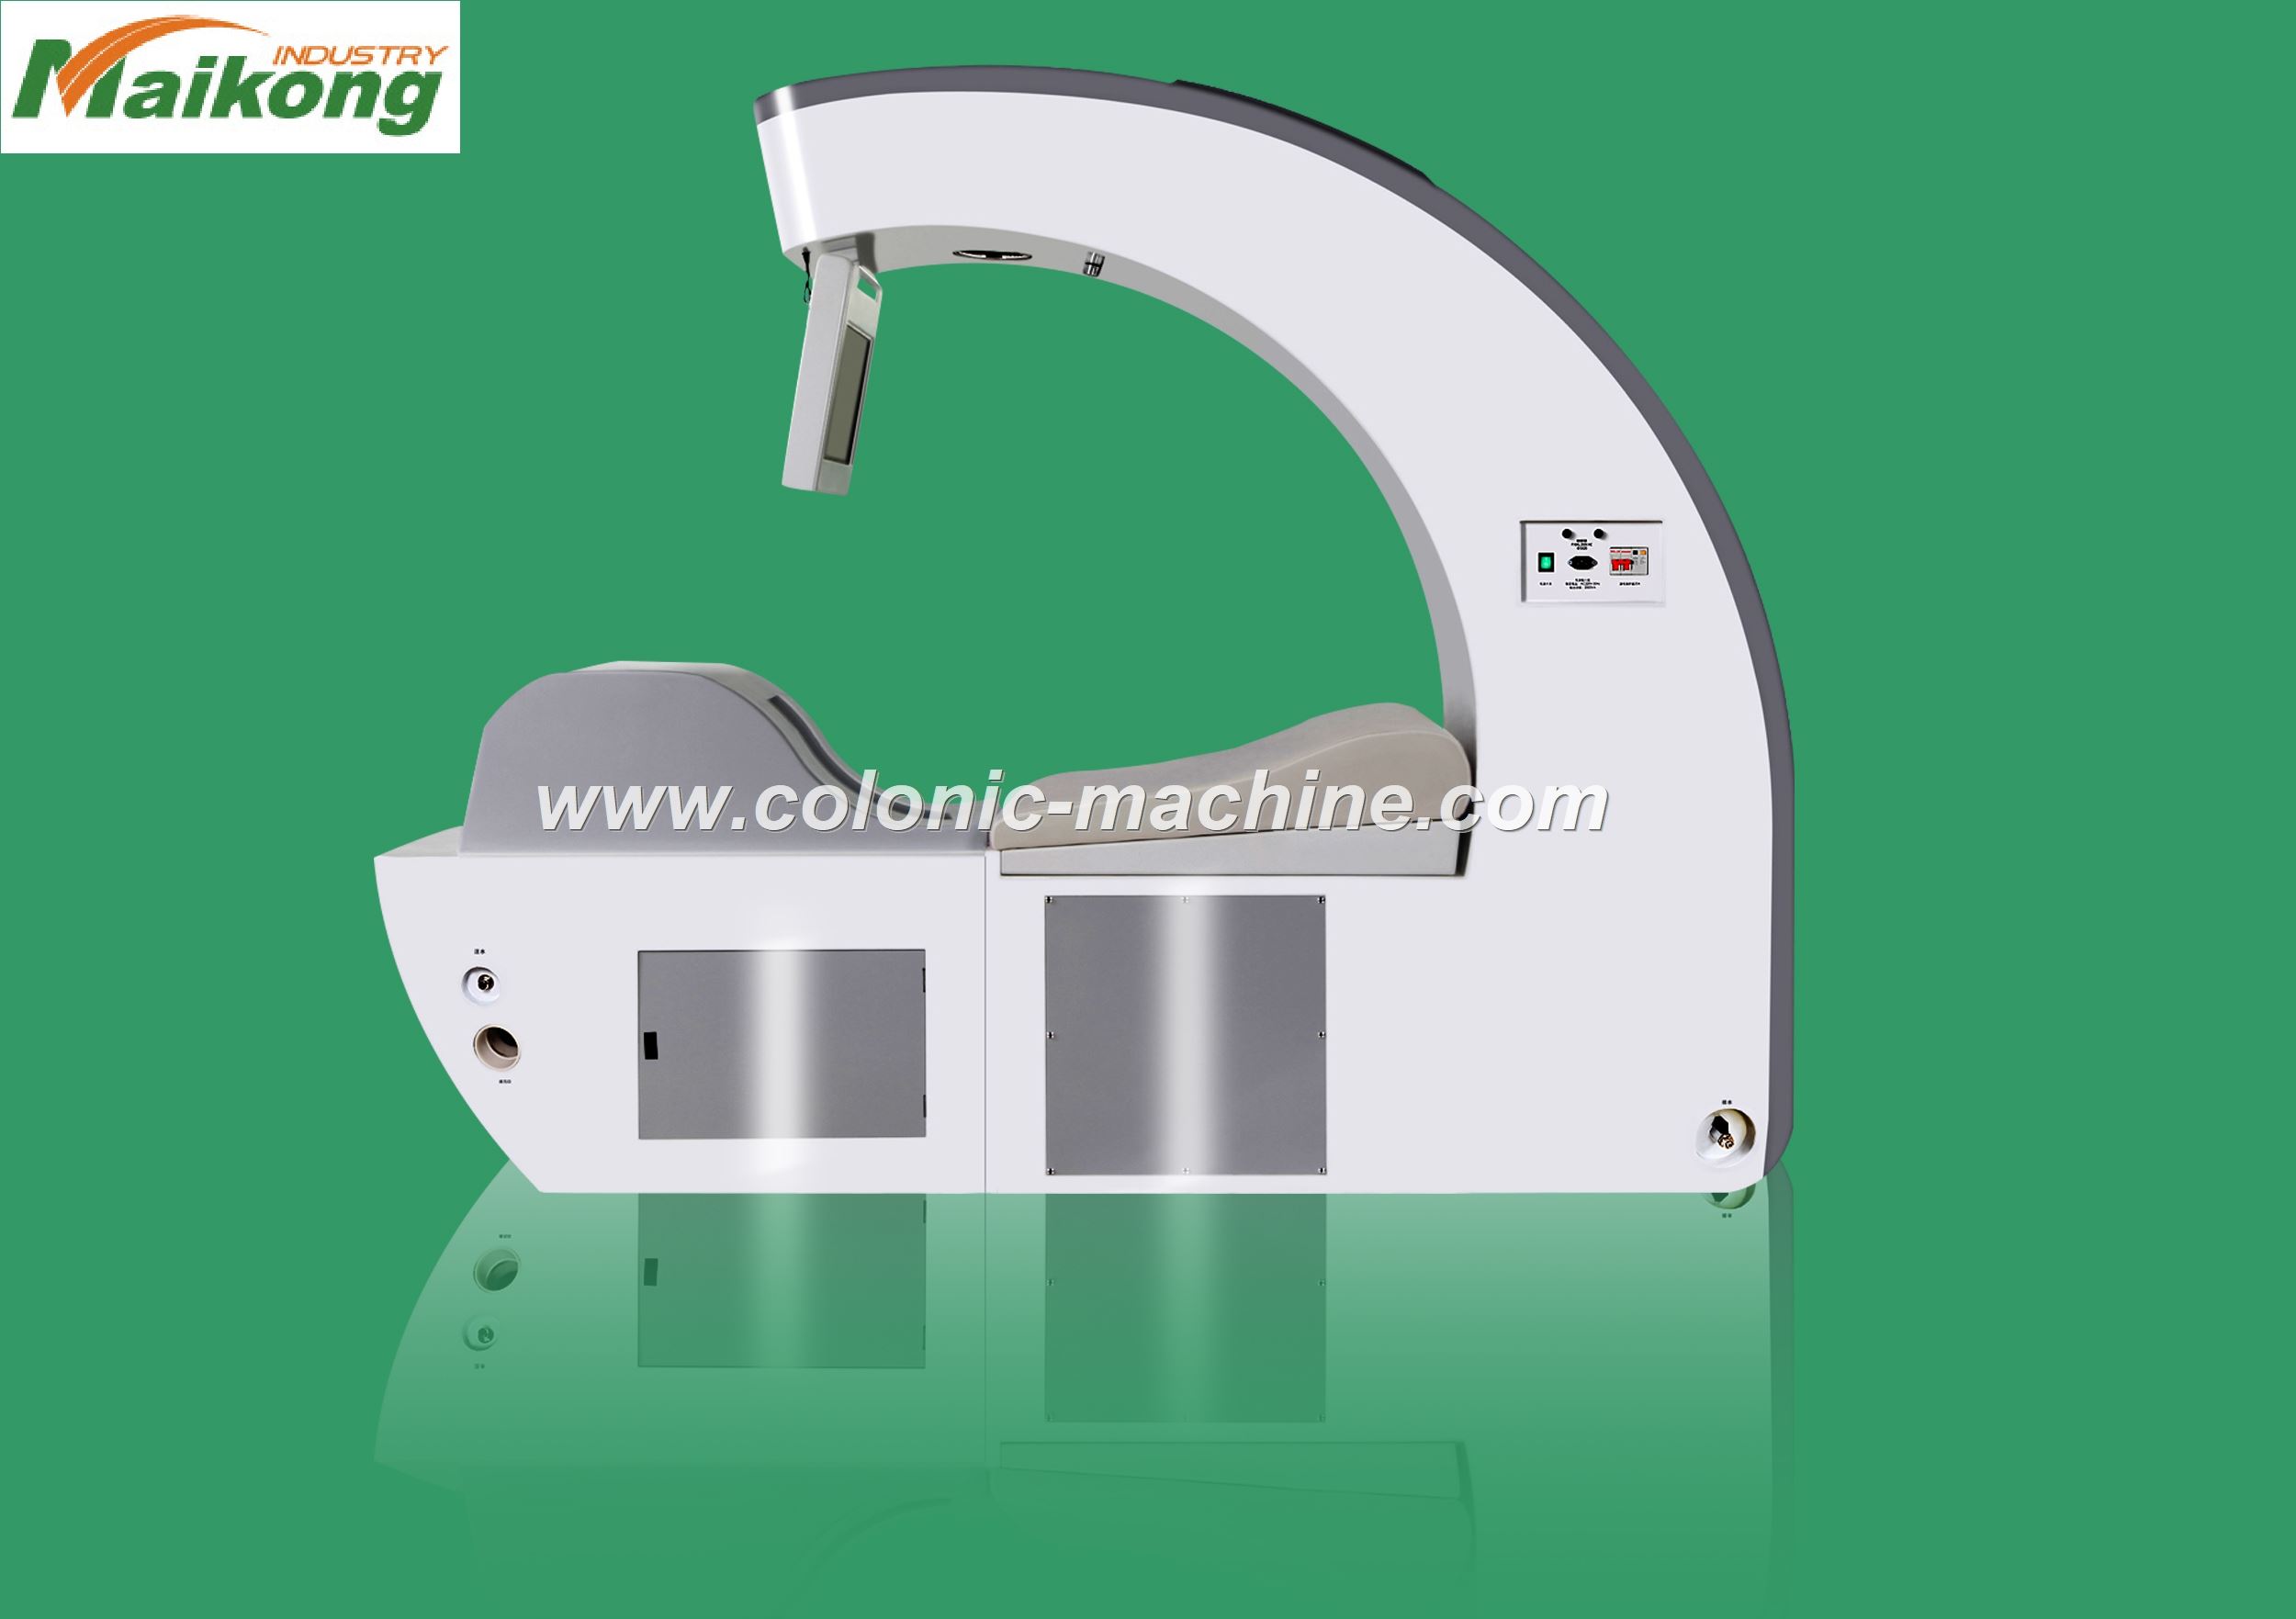 how to set up a colon hydrotherapy machine